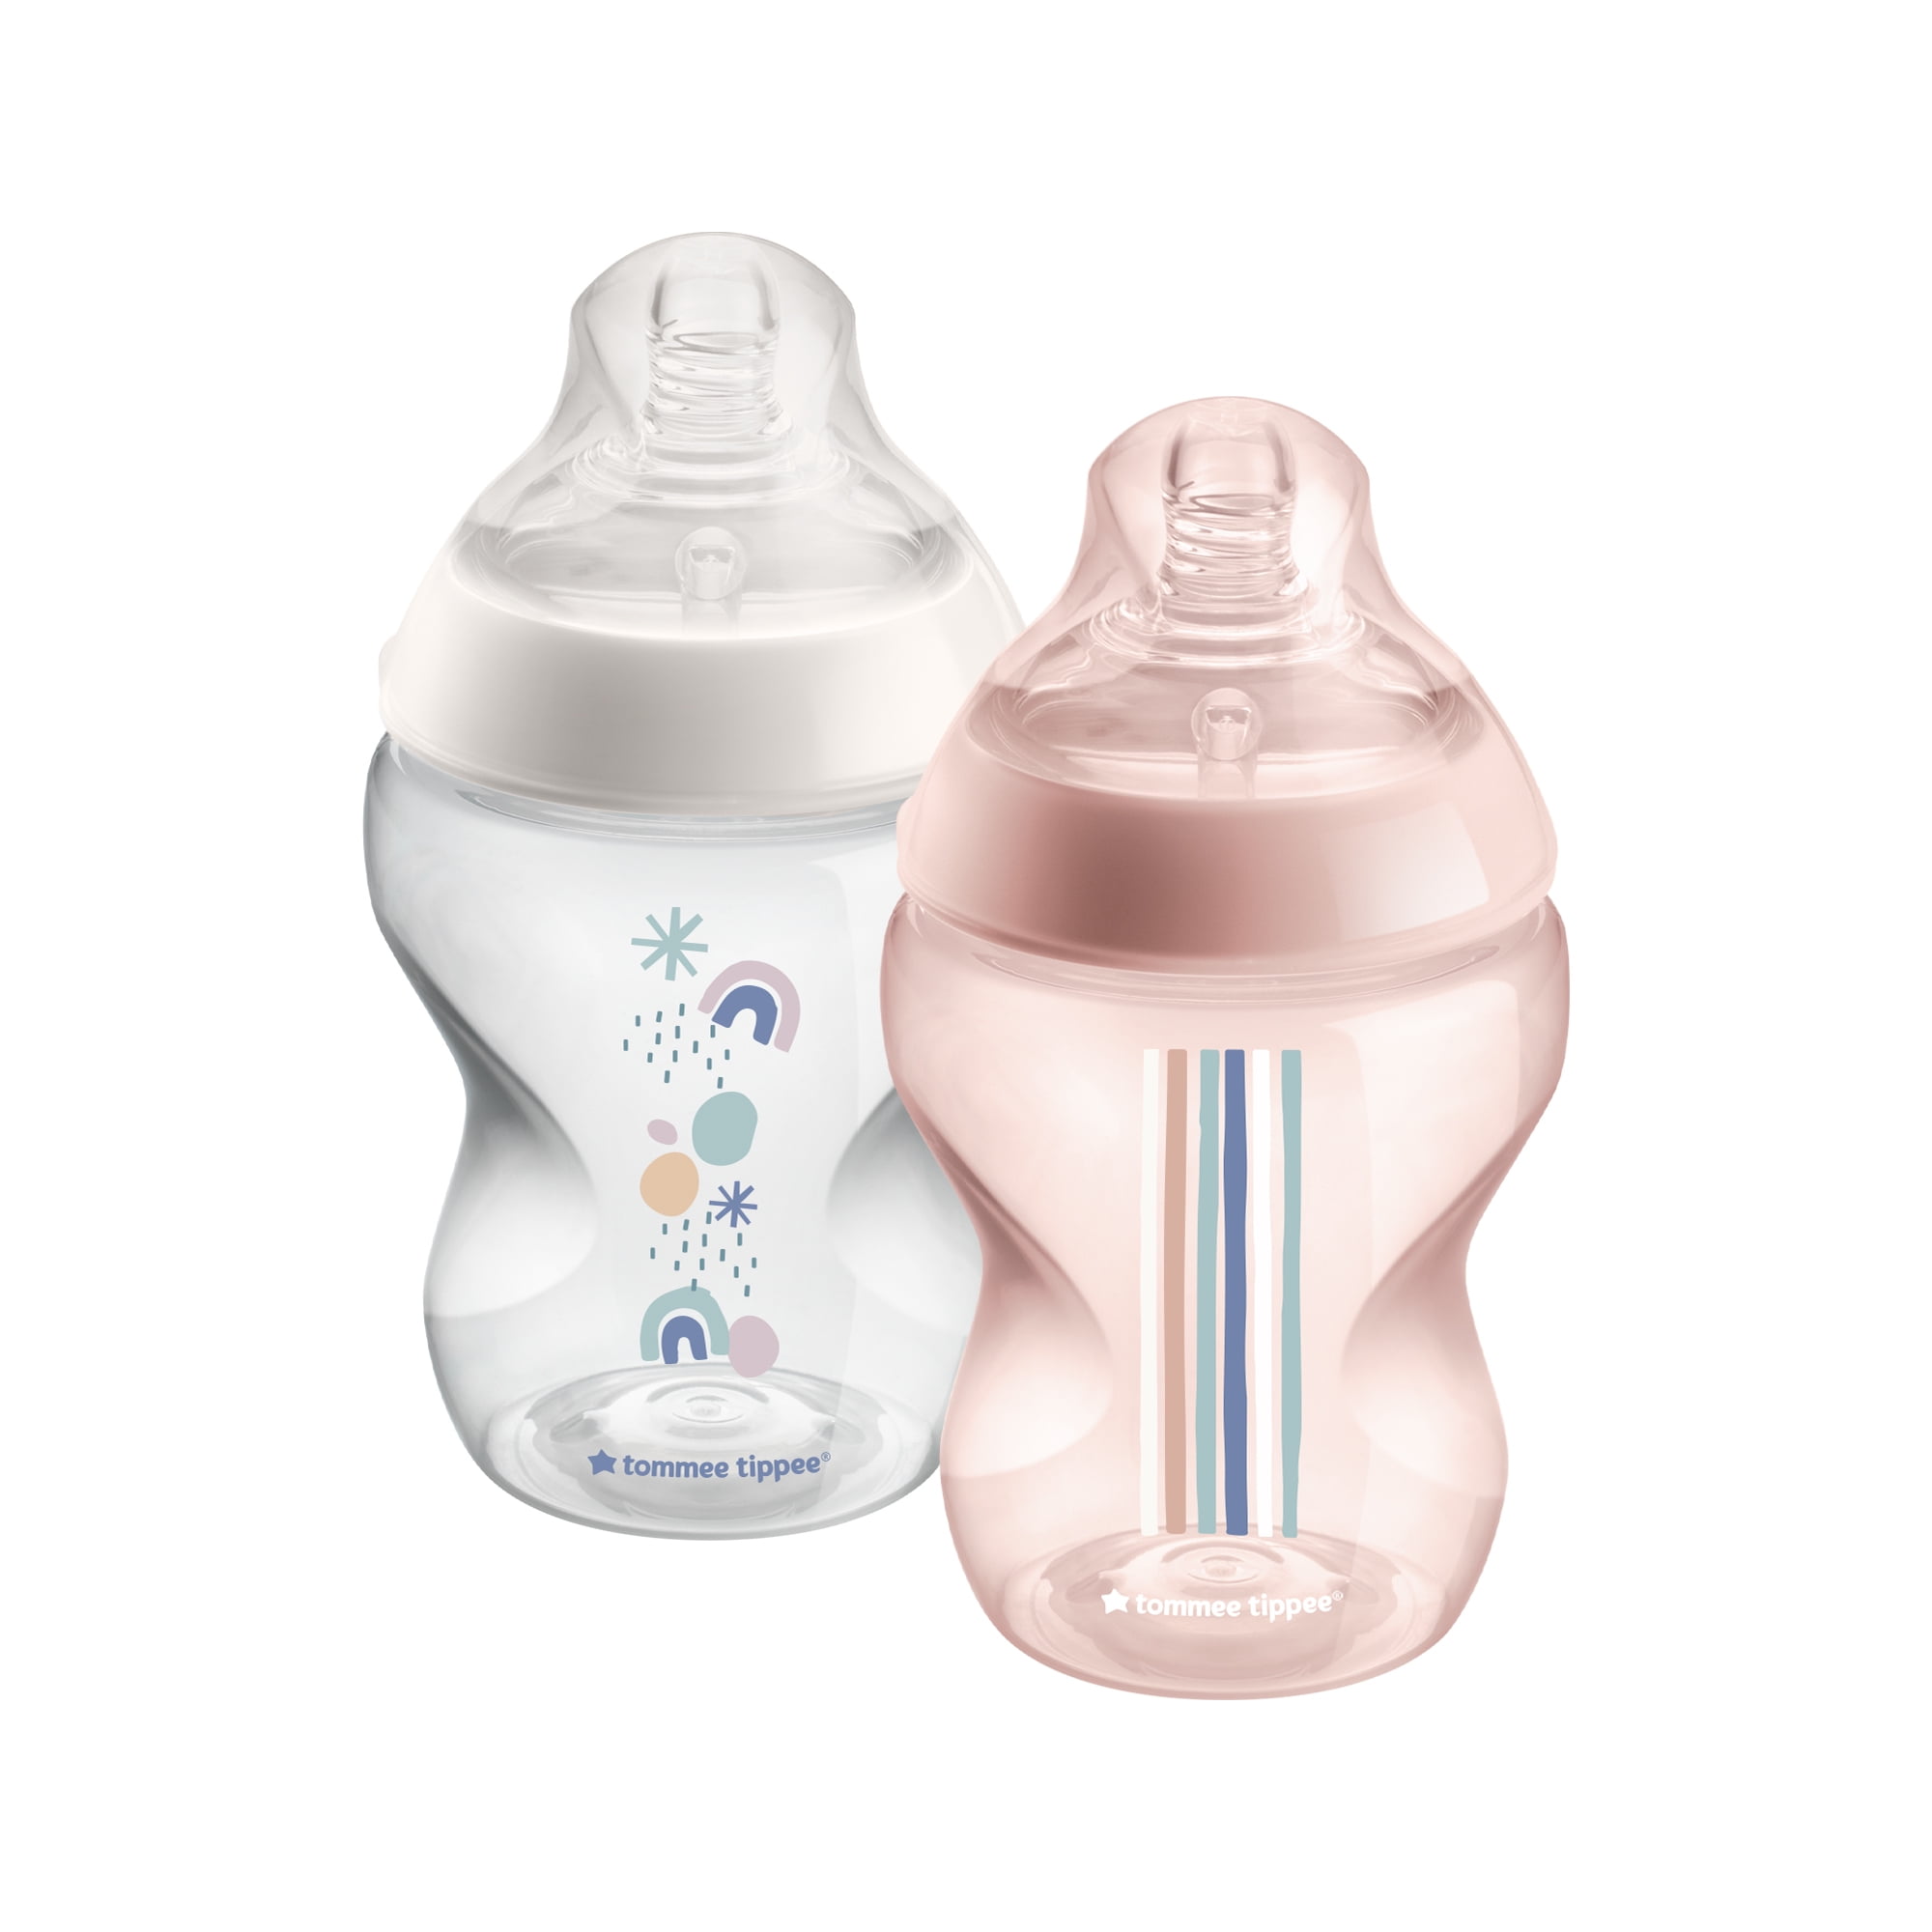 Tommee Tippee Closer to Nature Baby Bottles | 9oz, 2 Count | Breast-Like Nipples with Anti-Colic Valve, Size: 9 fl Ounce